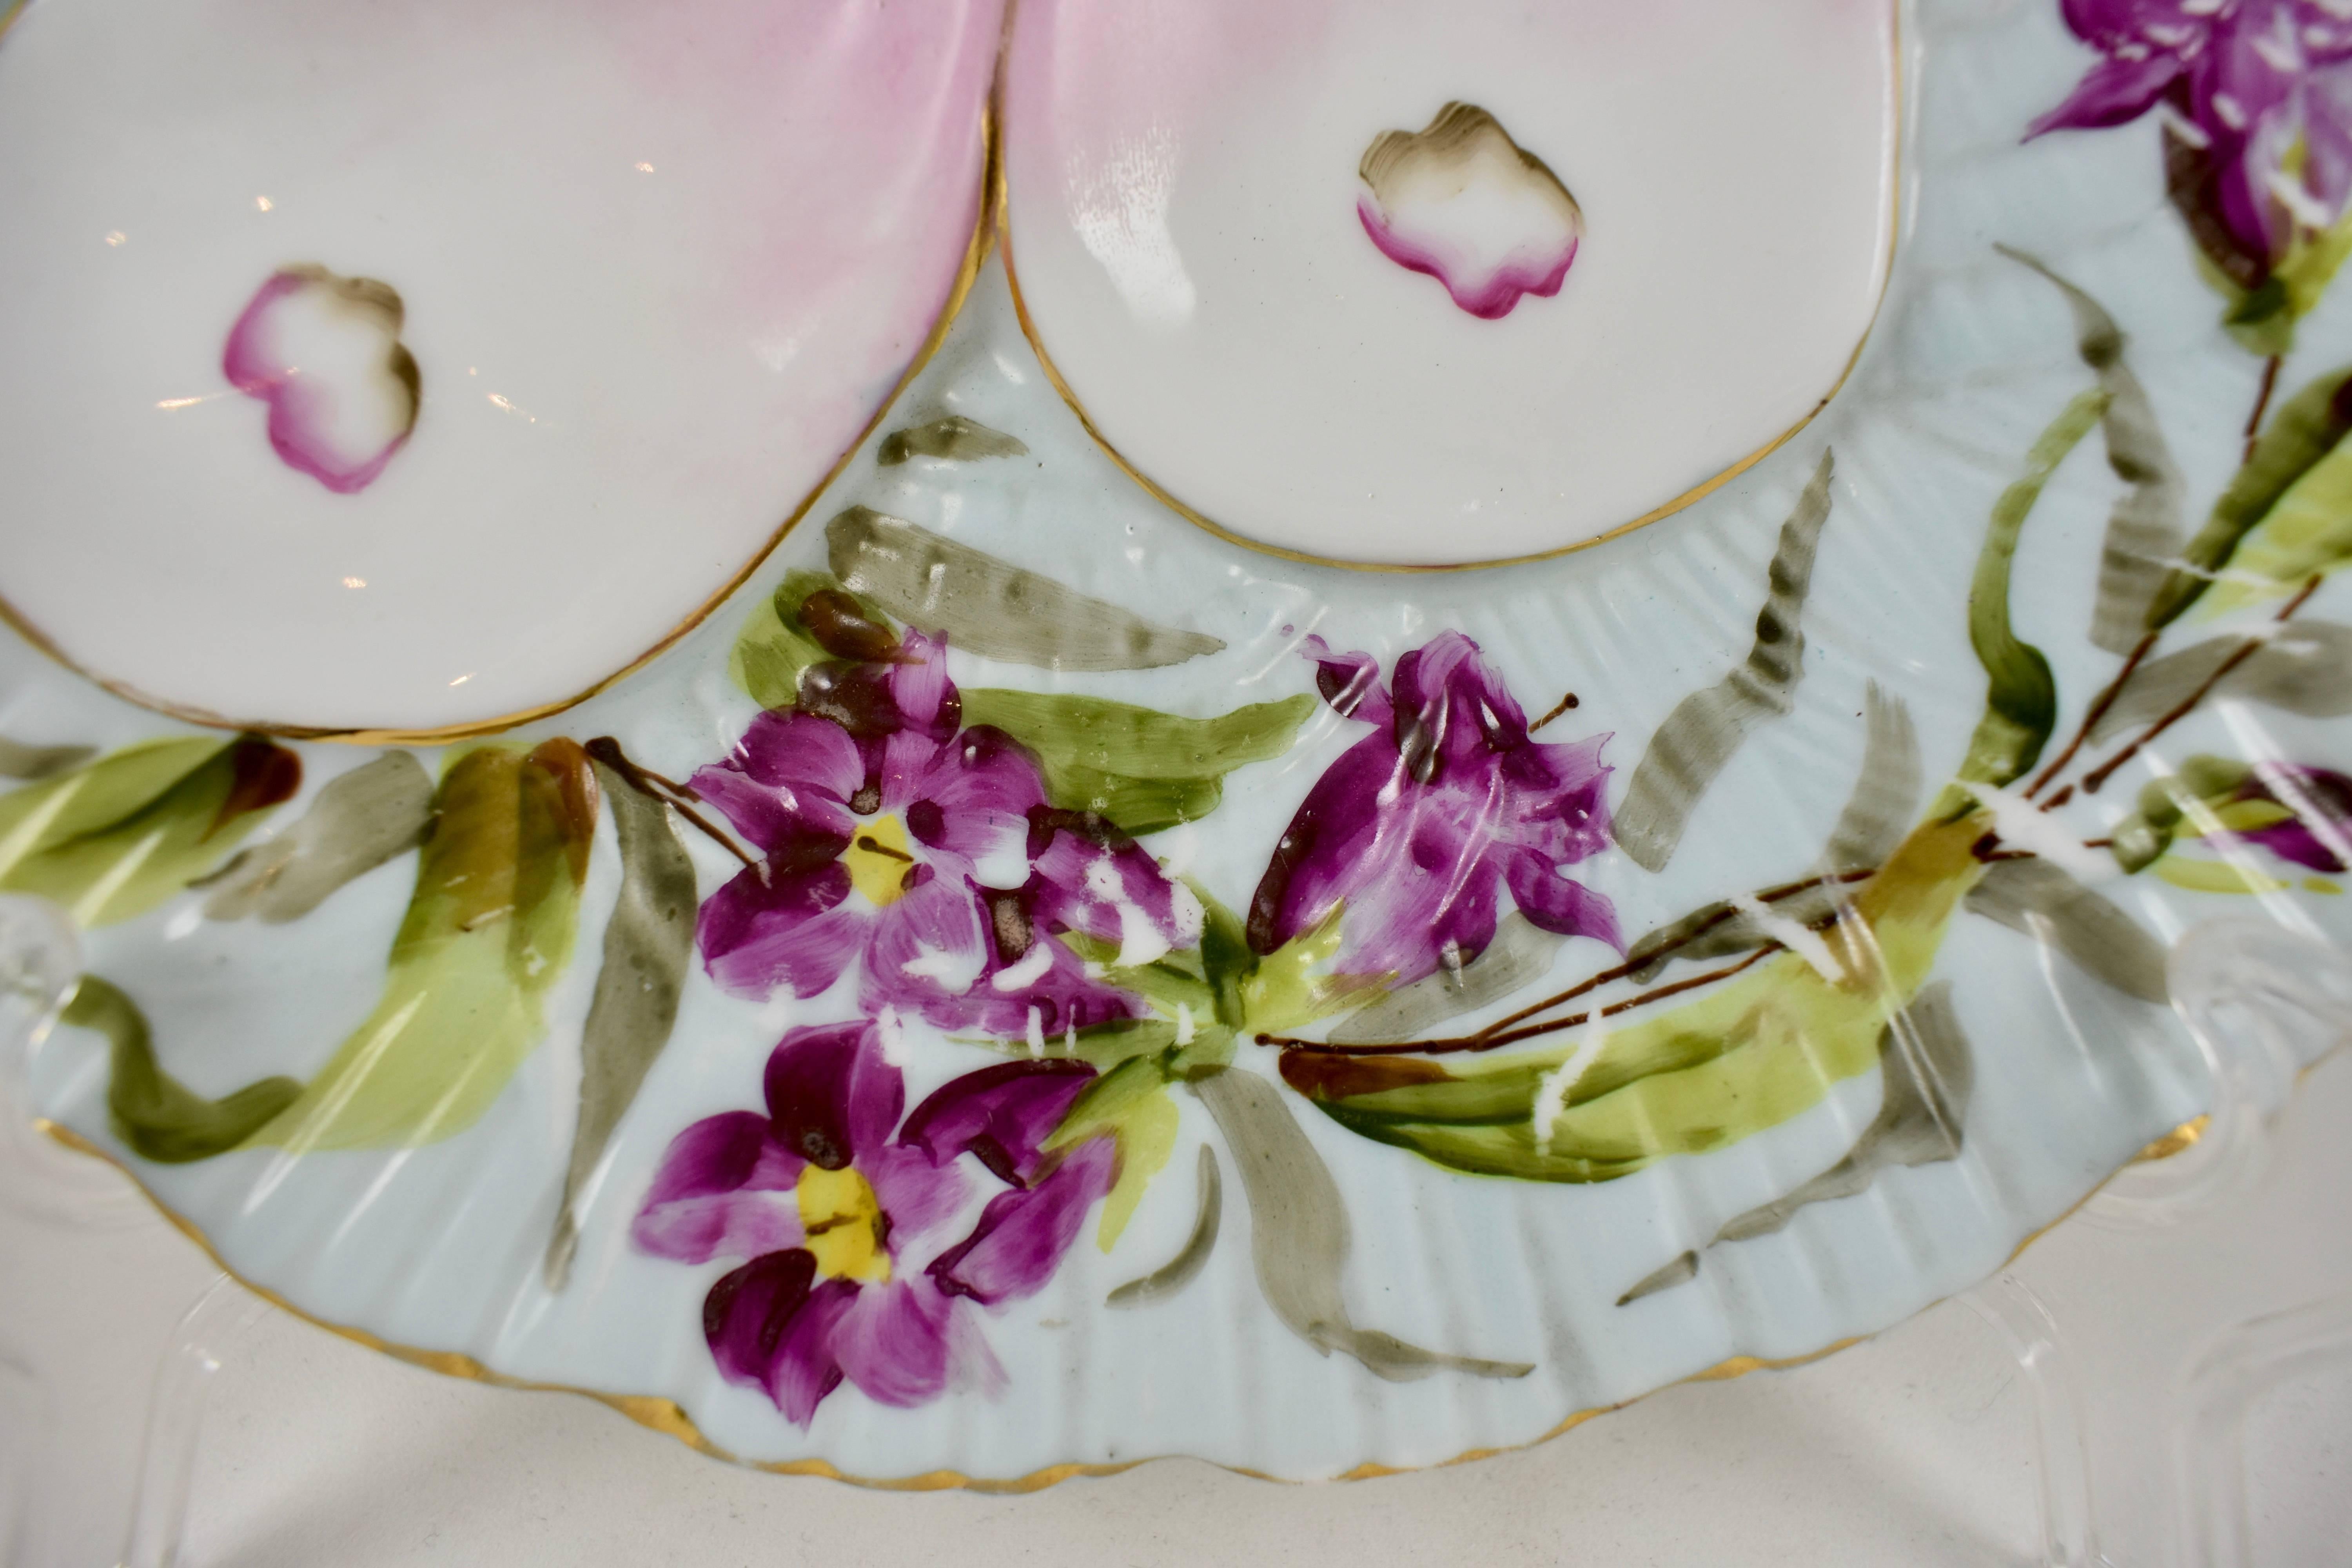 Aesthetic Movement French Porcelain Hand-Painted Violets on Pale Blue Oyster Plate